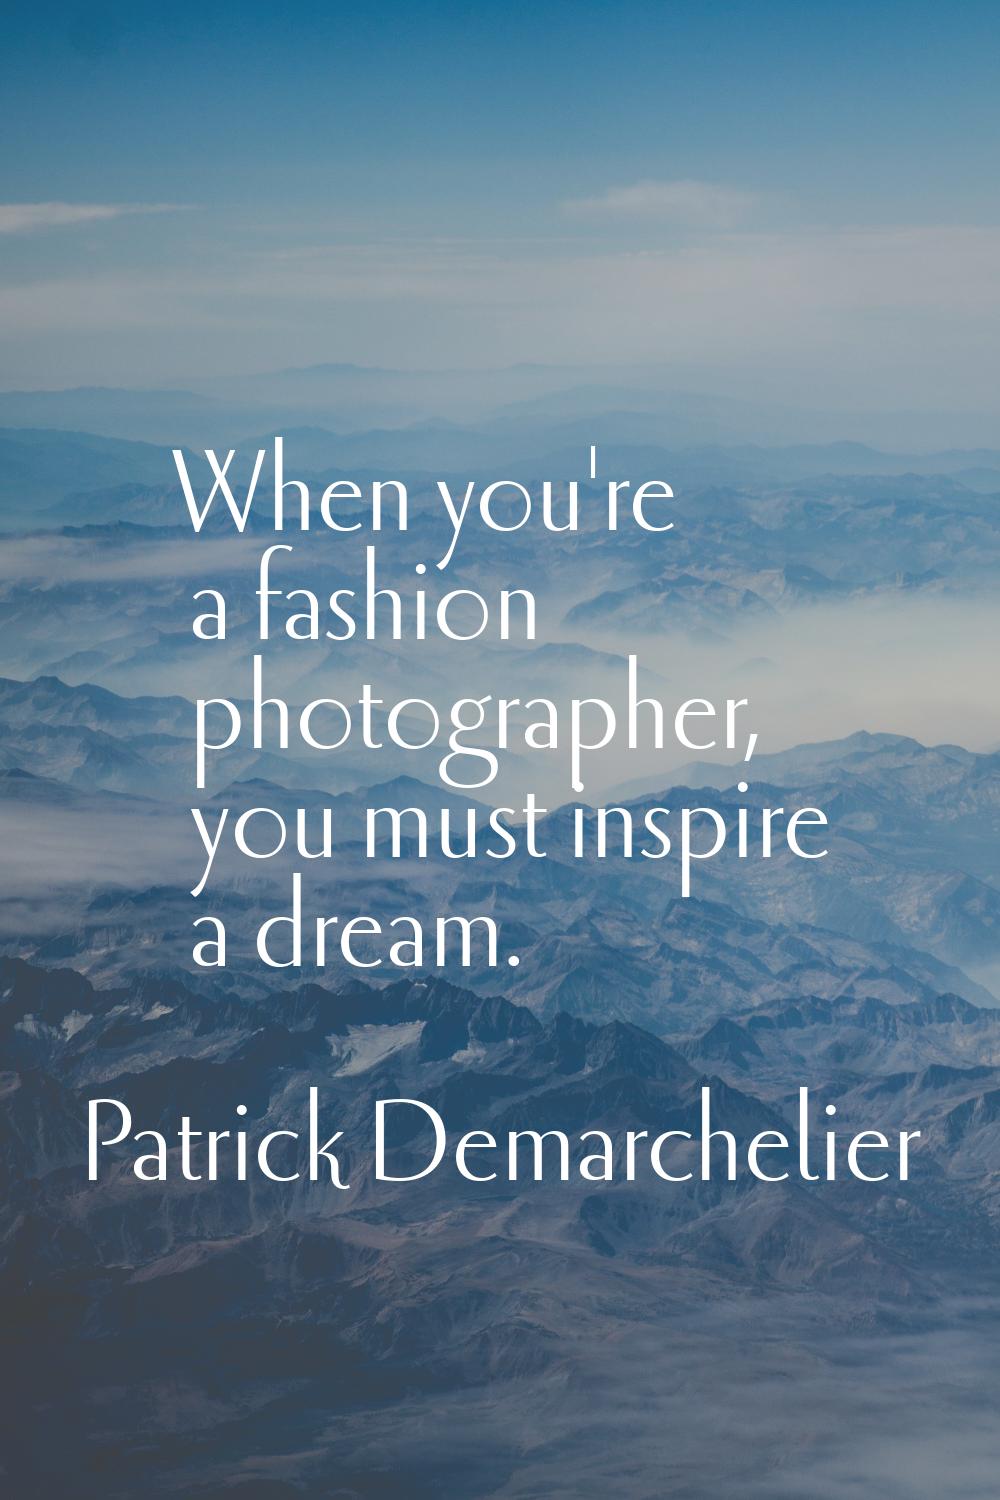 When you're a fashion photographer, you must inspire a dream.